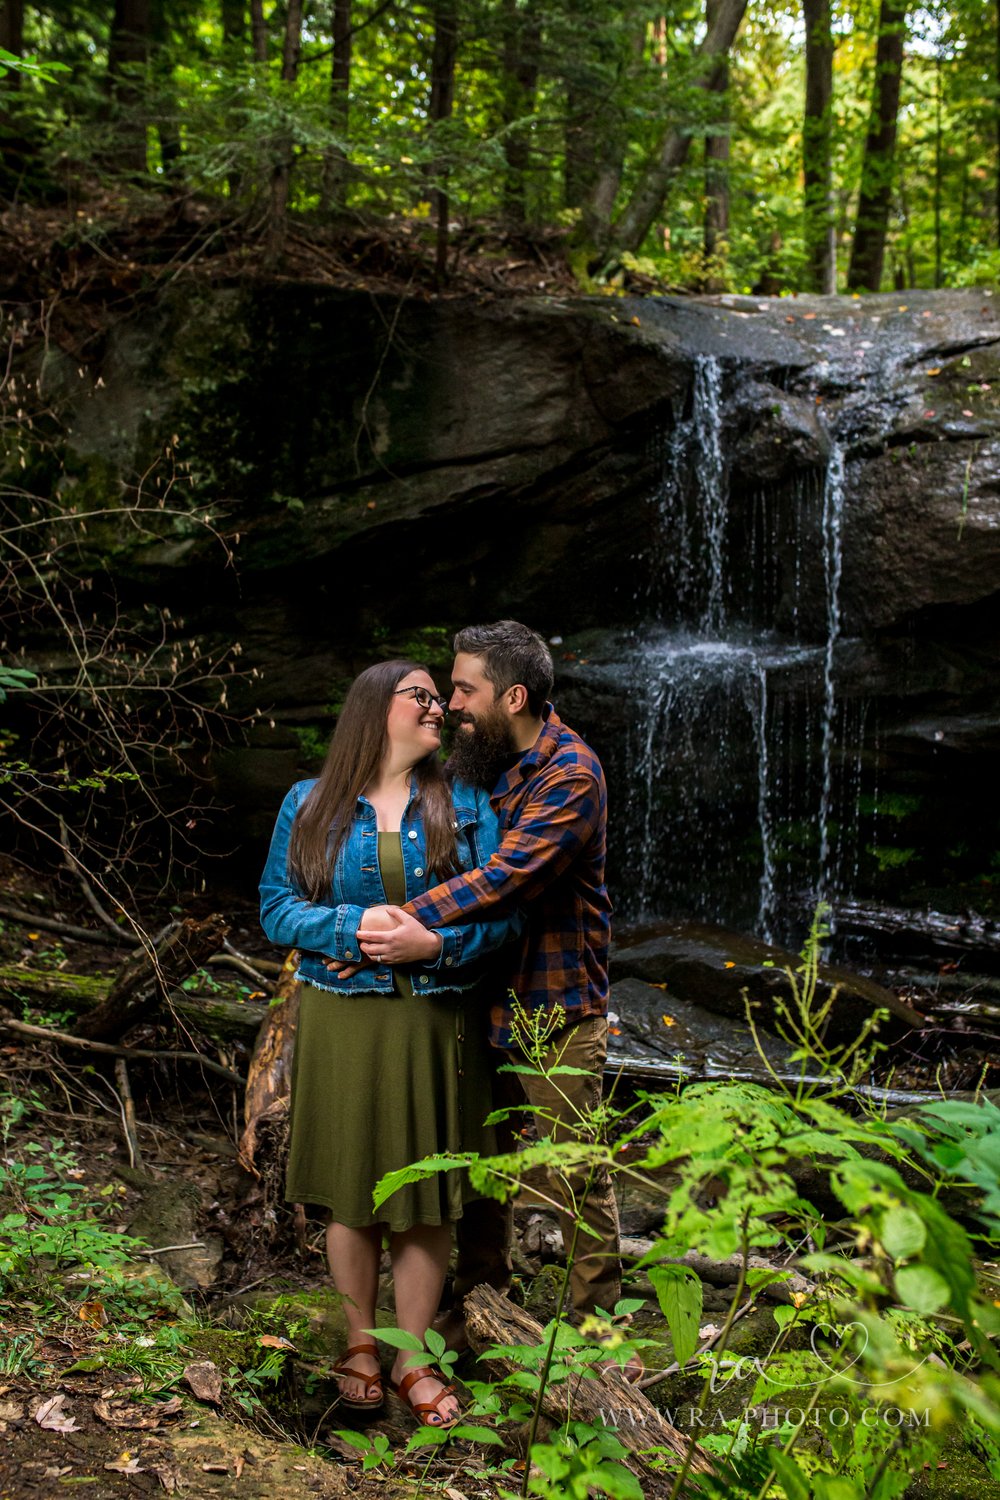 017-MGS-FALLS-CREEK-PA-ENGAGEMENT-PICTURES.jpg